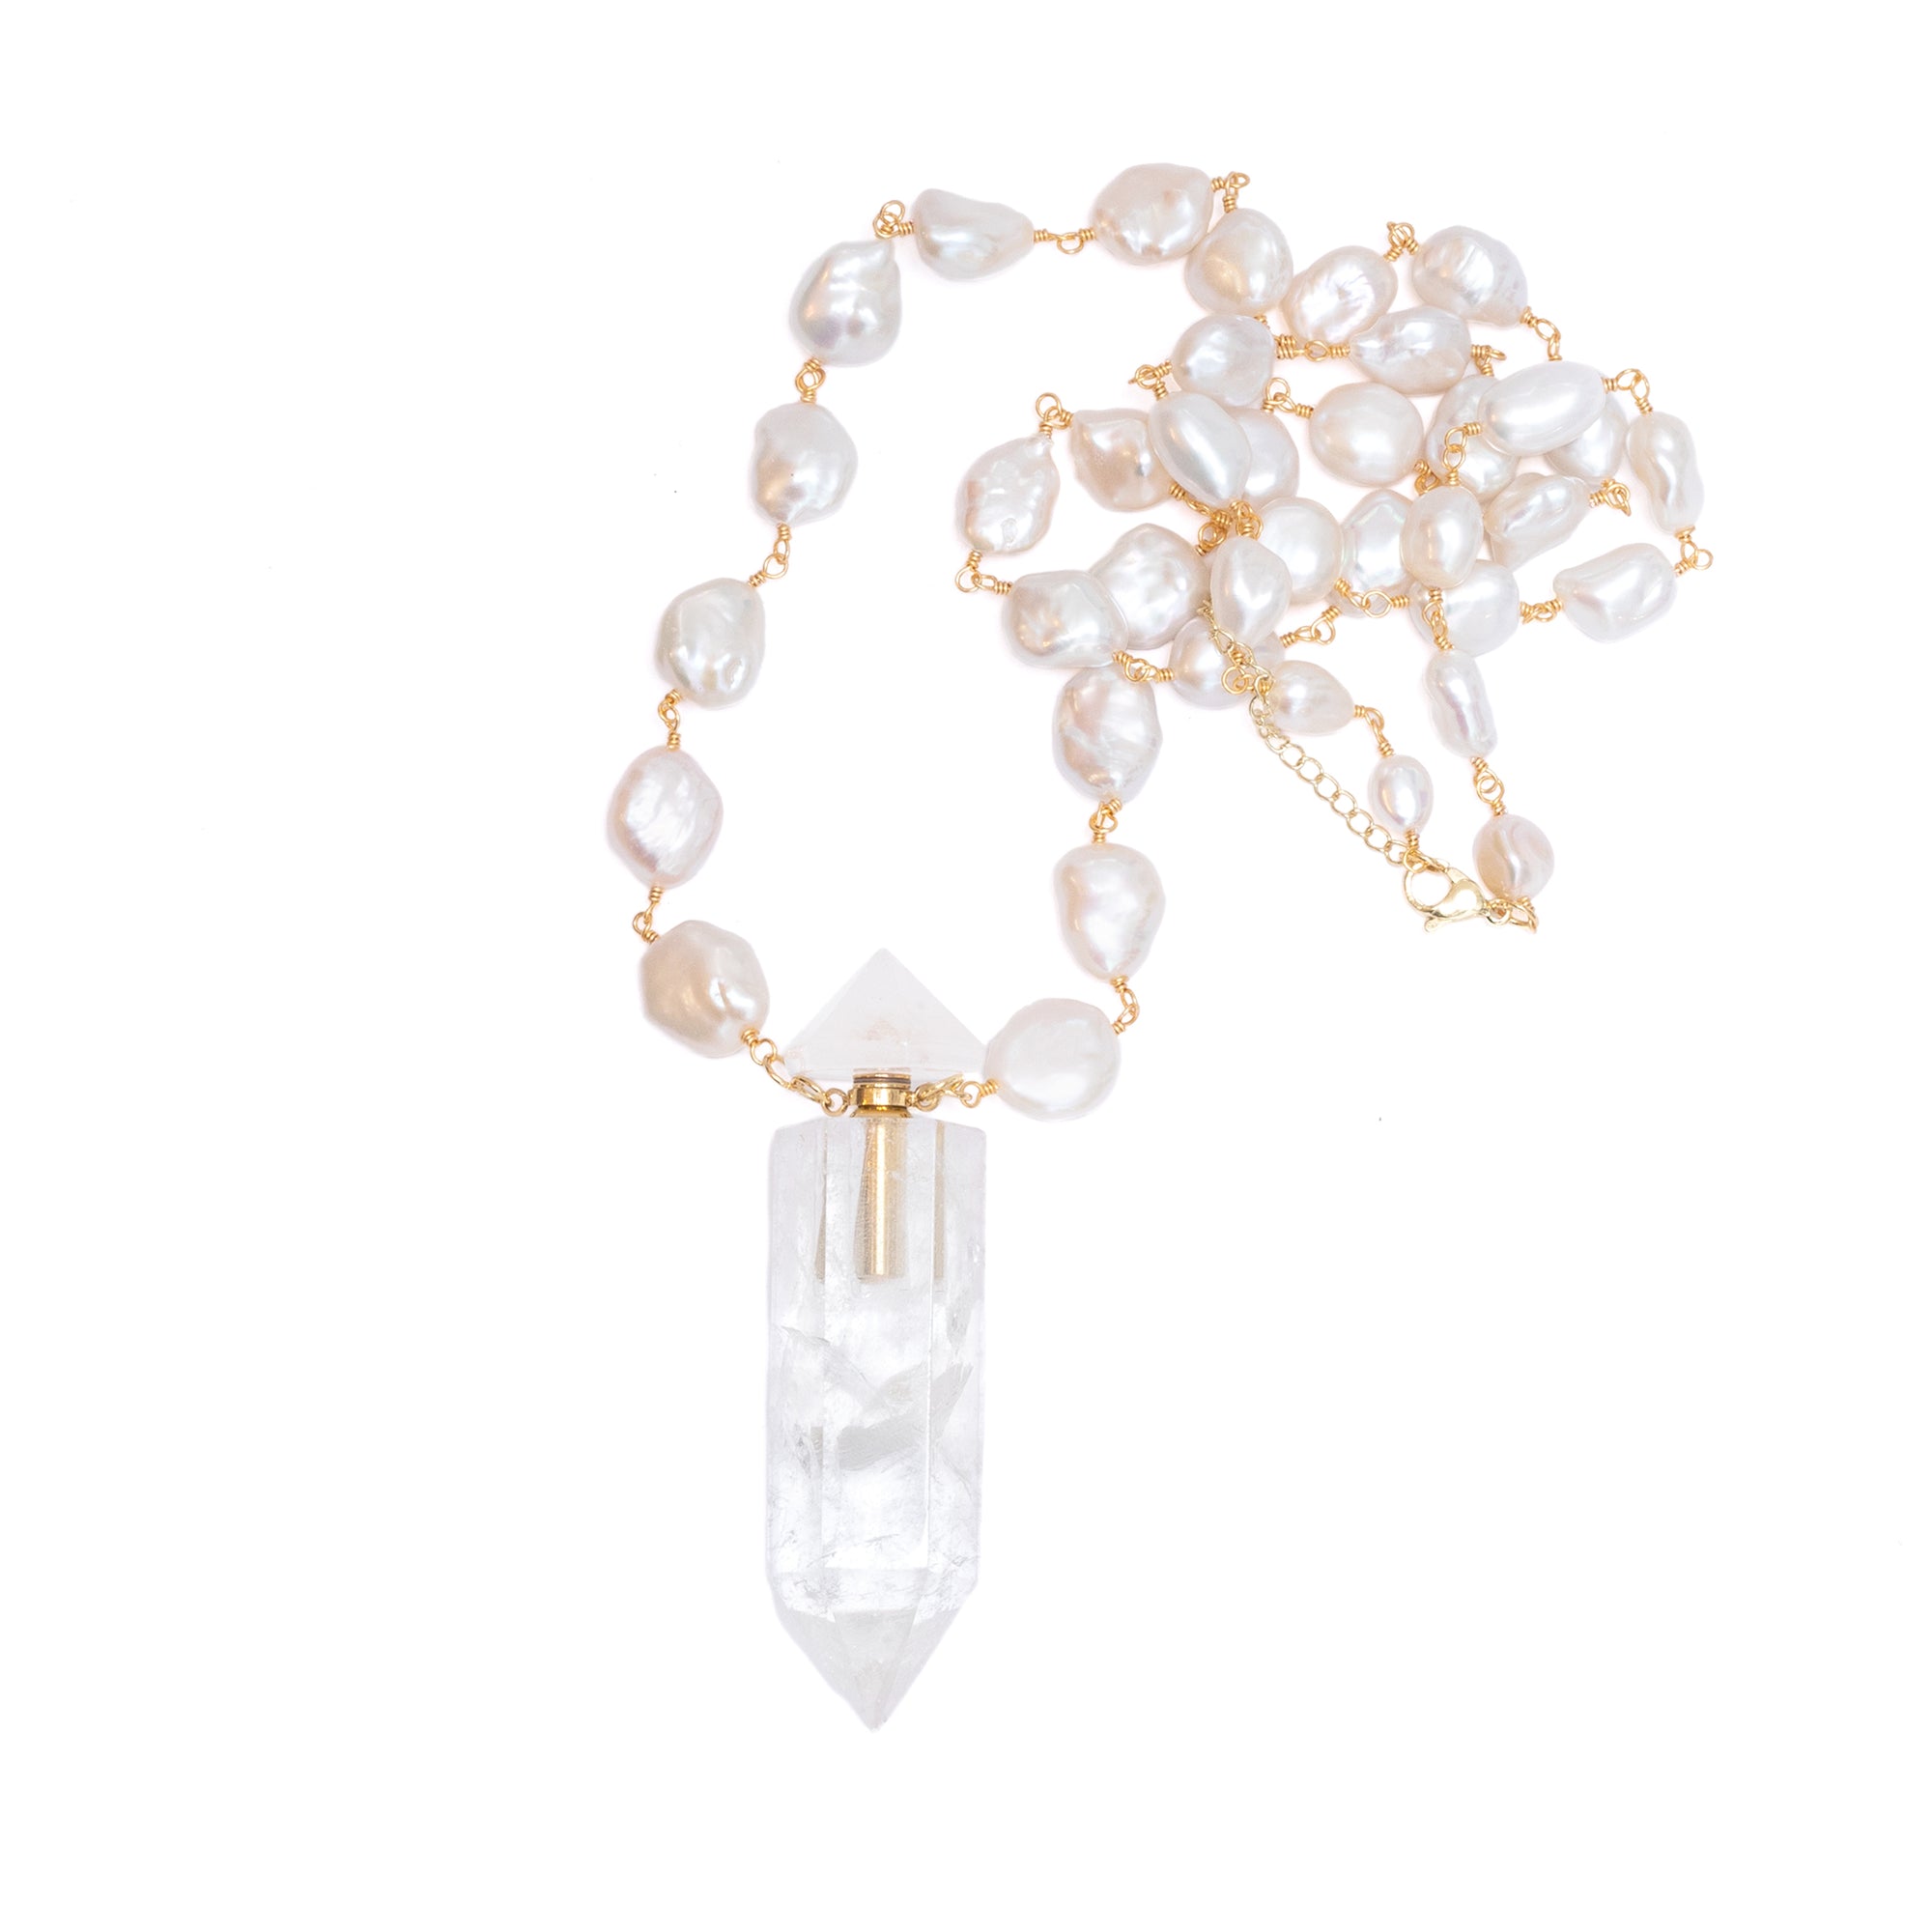 Clear Quartz Bottle Necklace with Pearls